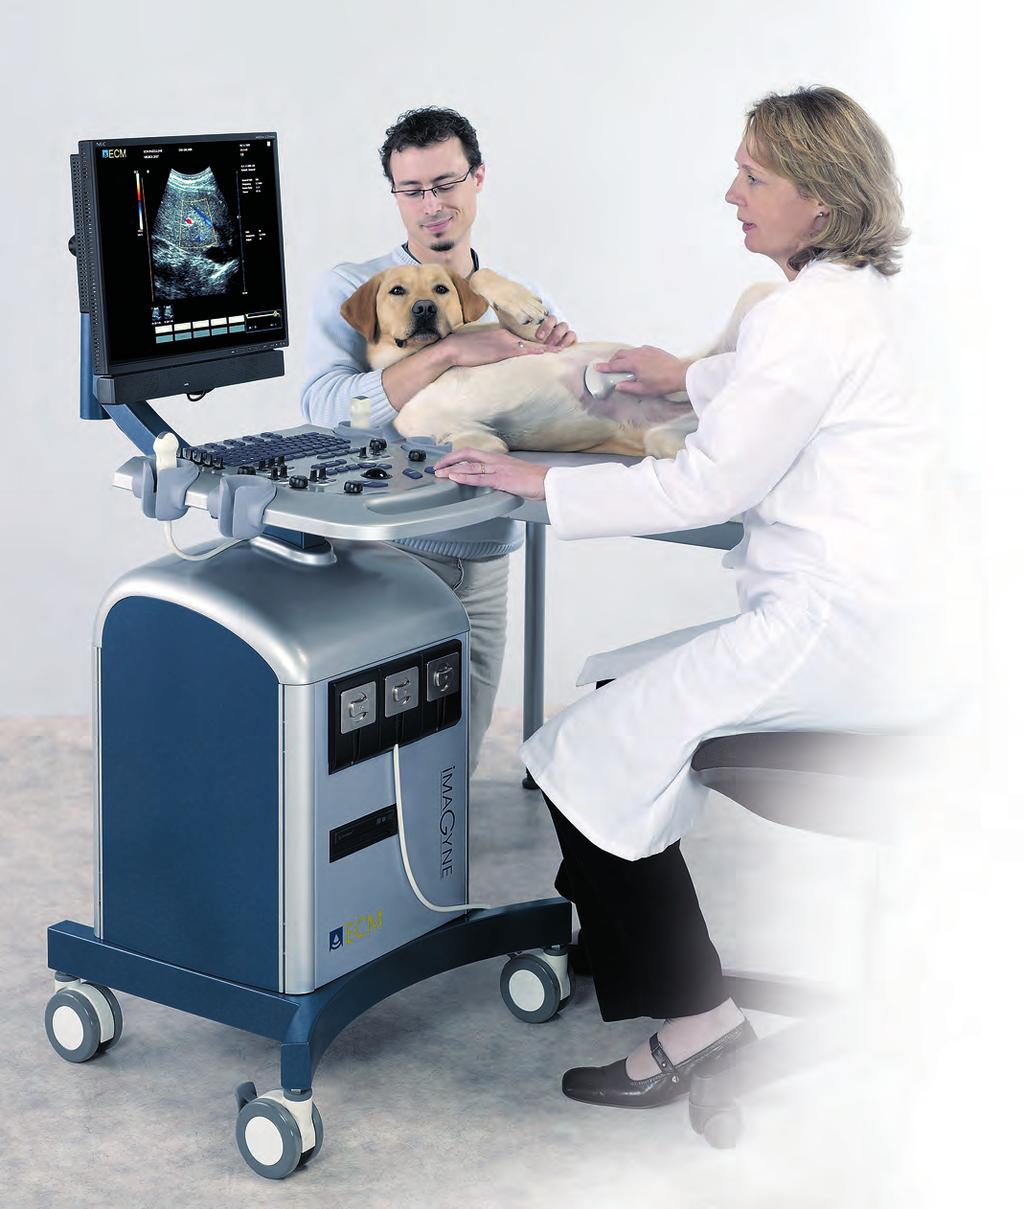 Externally small, with a pleasing form, internally very powerful with the features of high-level ultrasound scanners. Powerful and easy to use, Imagyne offers an exceptional image quality.